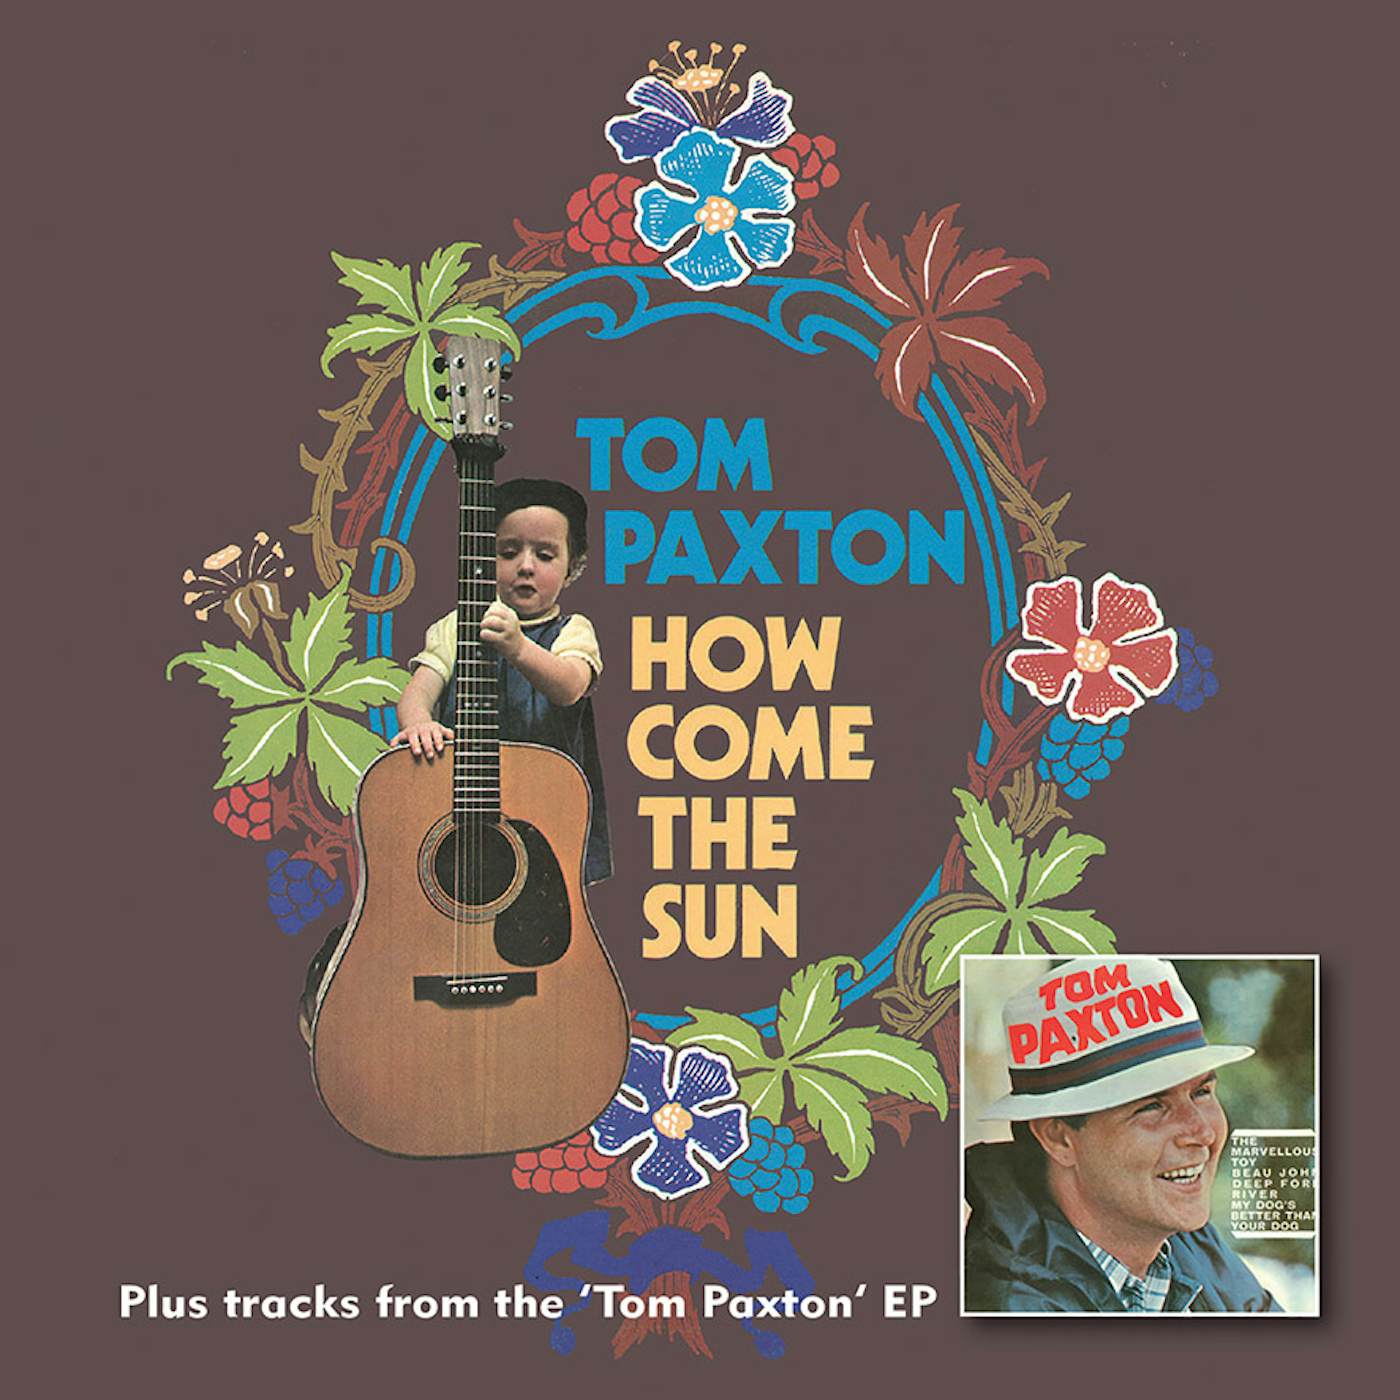 Tom Paxton HOW COME THE SUN / TOME PAXTON CD